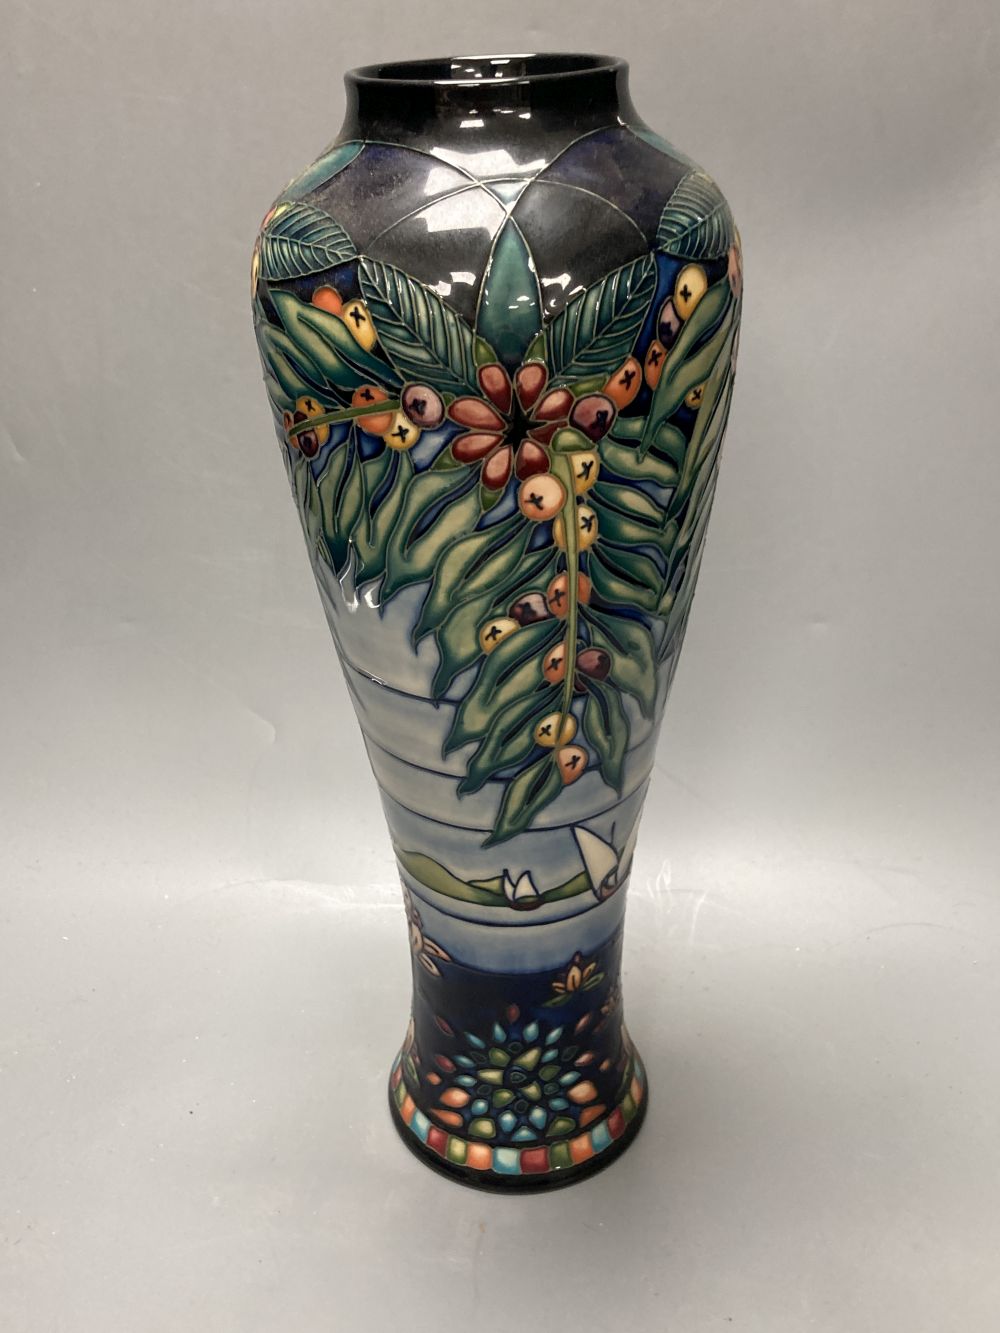 A Moorcroft vase, Serendipity pattern, designed by Nicola Slaney, limited edition number 94 of 300, signed and dated 2000, height 38